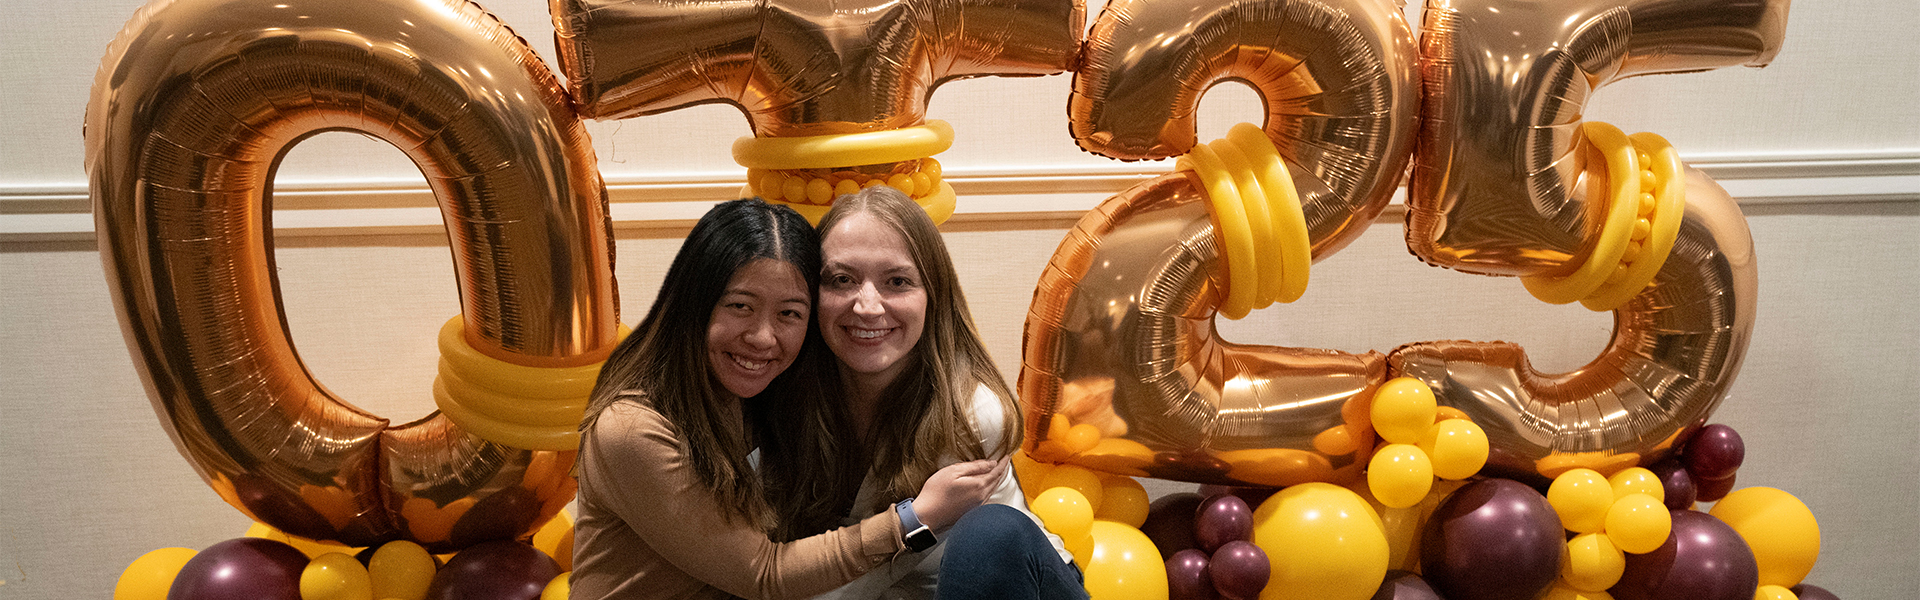 Two women embracing in front of balloons that spell out "OT 25"